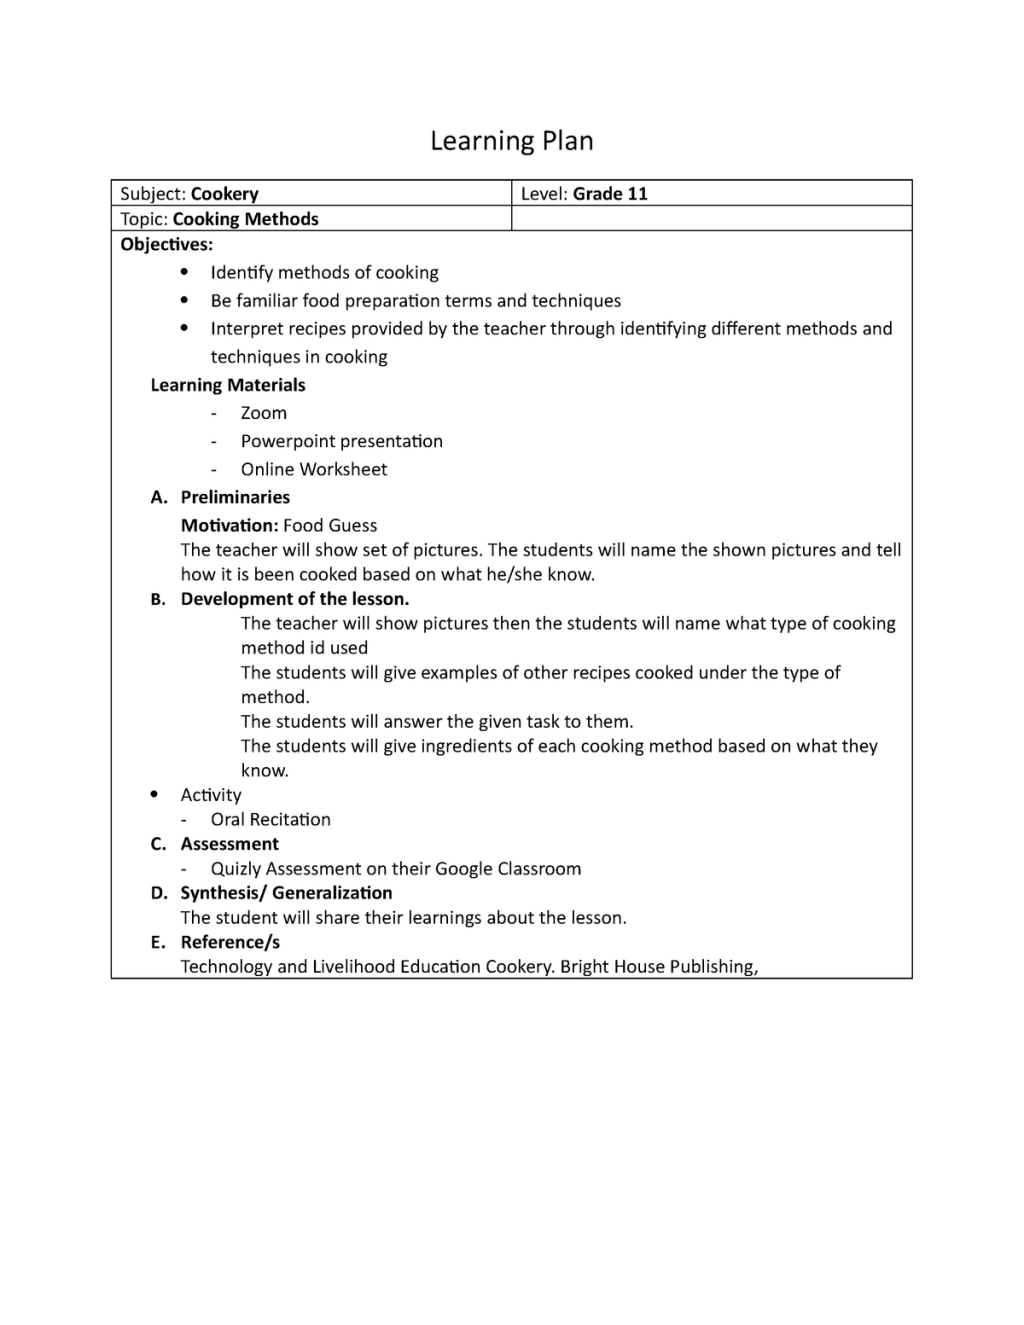 Picture of: Lesson plan – Lecture notes  – Learning Plan Subject: Cookery